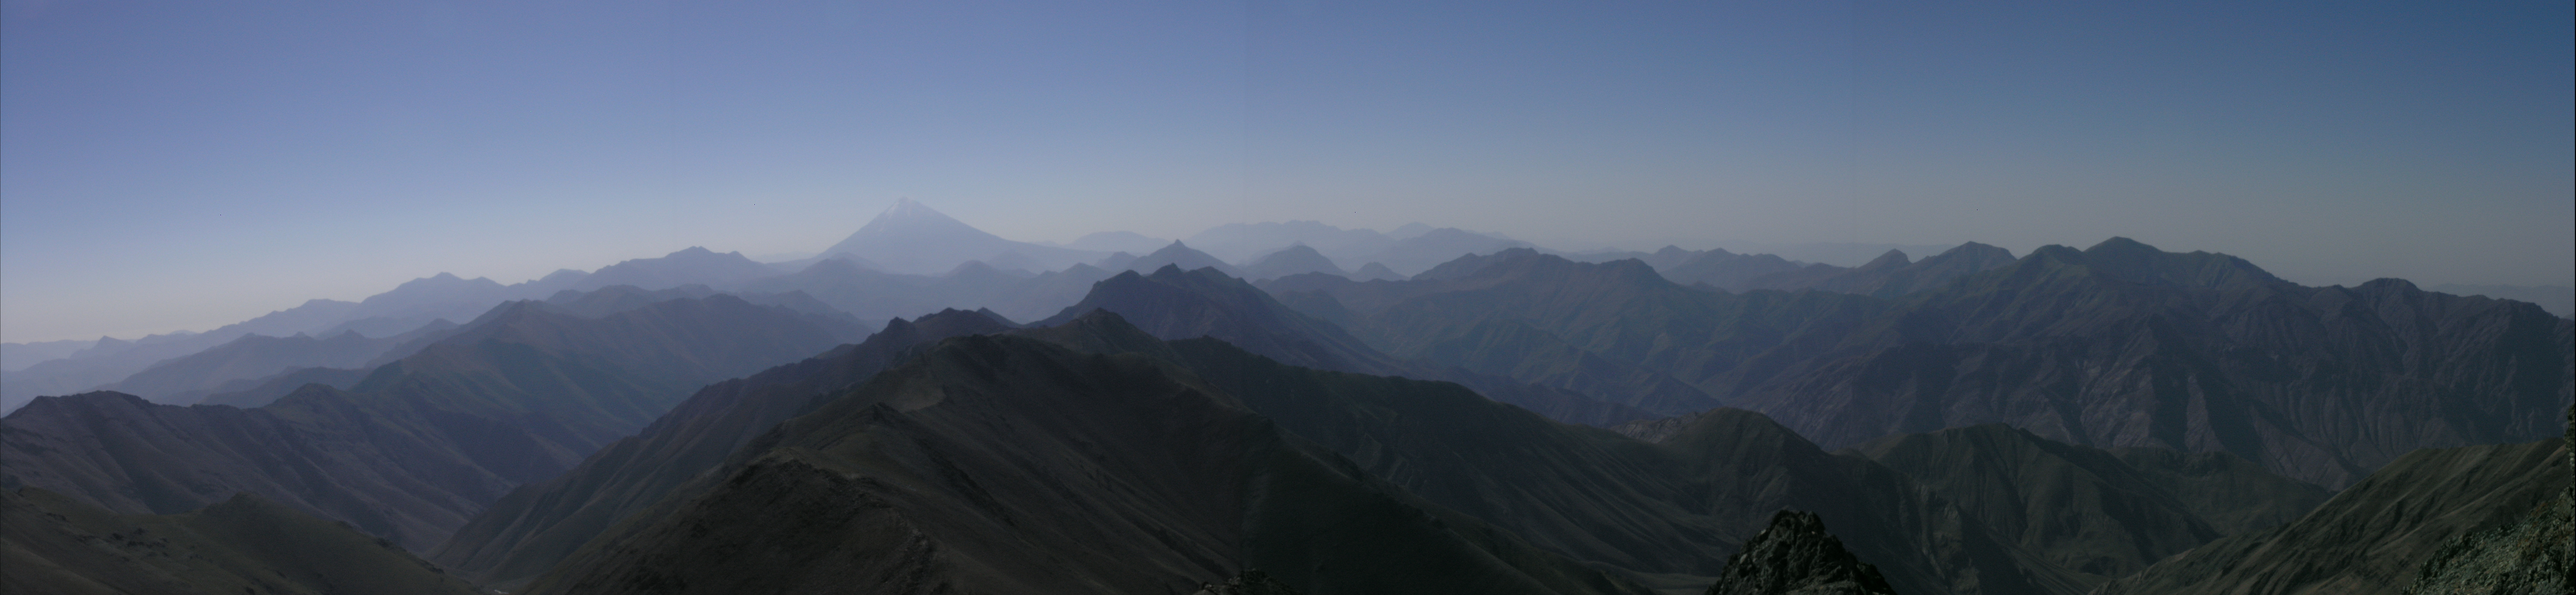 Central Alborz and Damavand Panorama from Khole-No 